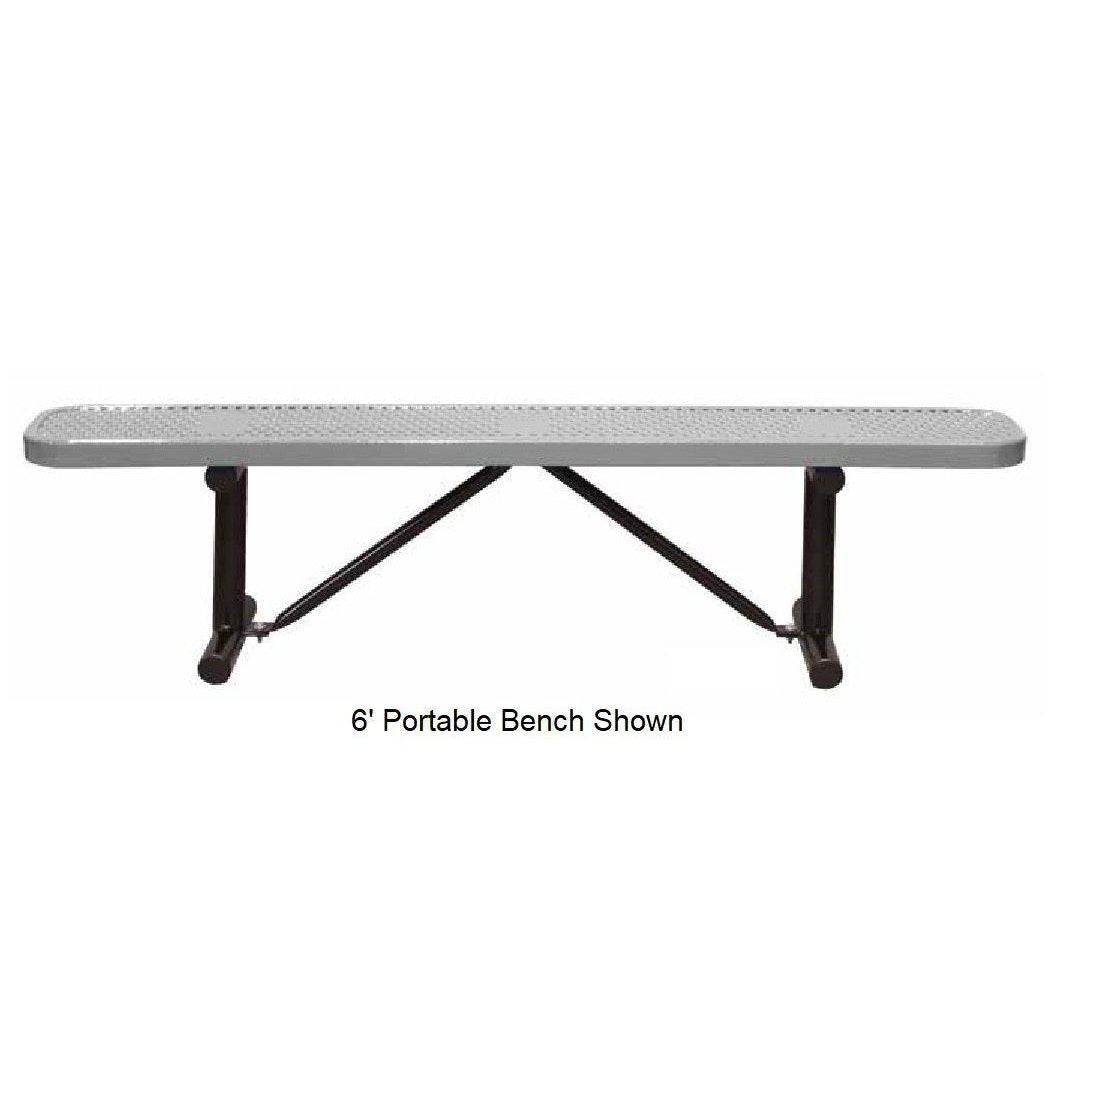 8’ Standard Perforated Bench Without Back, Portable